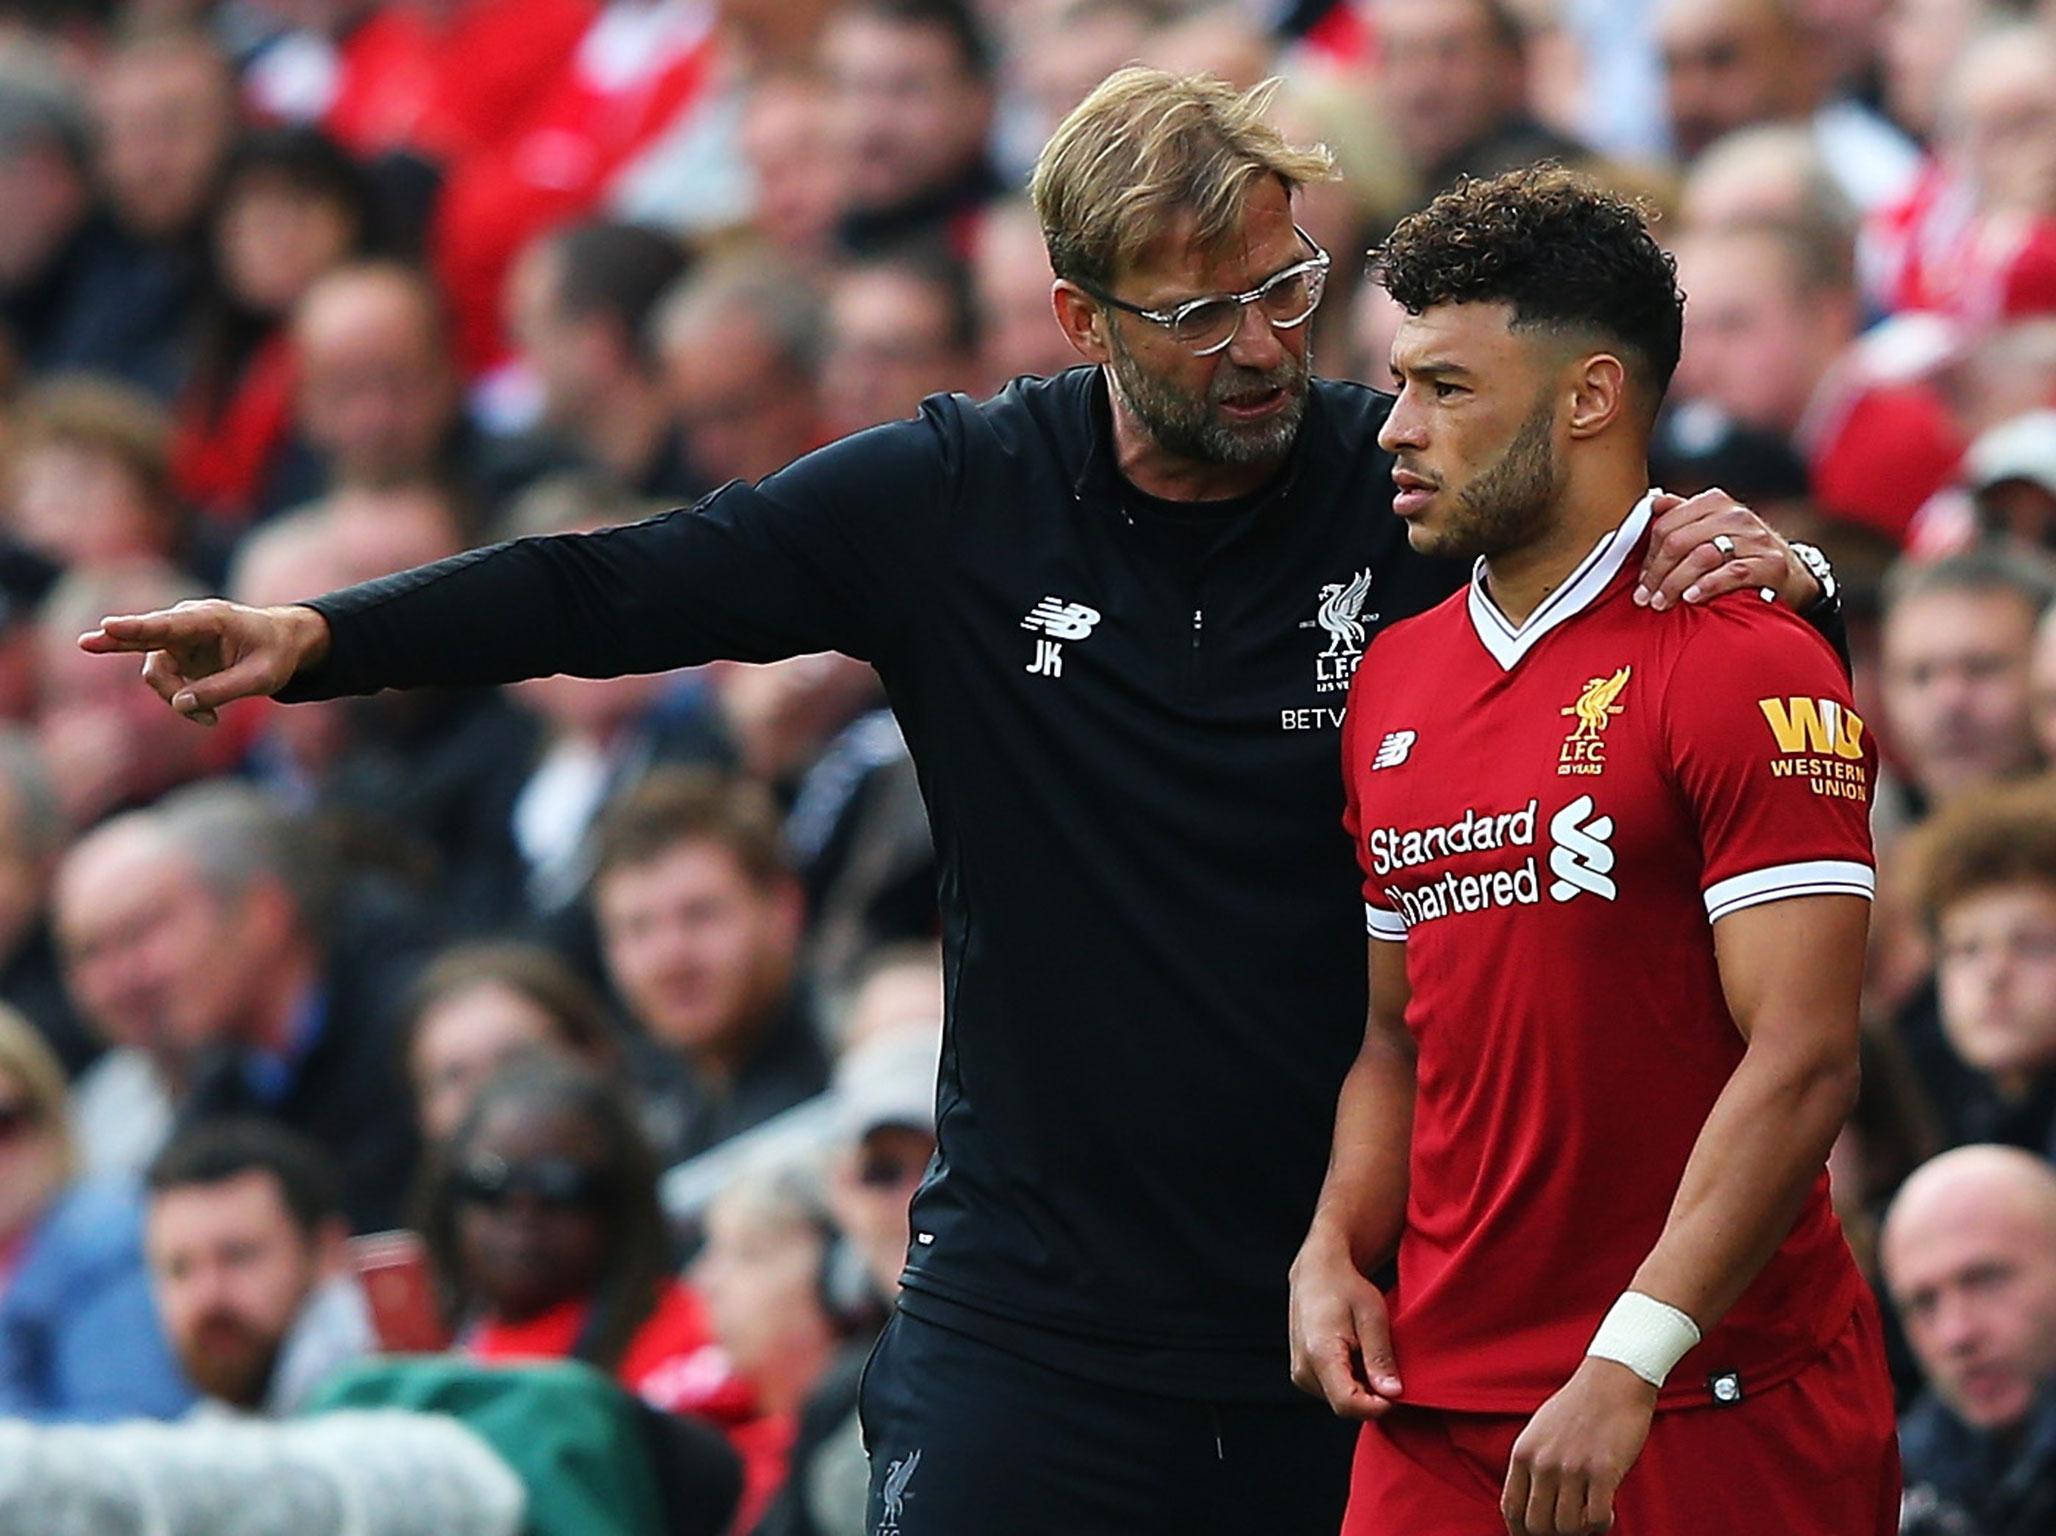 Klopp is introducing Oxlade-Chamberlain into life at Liverpool slowly